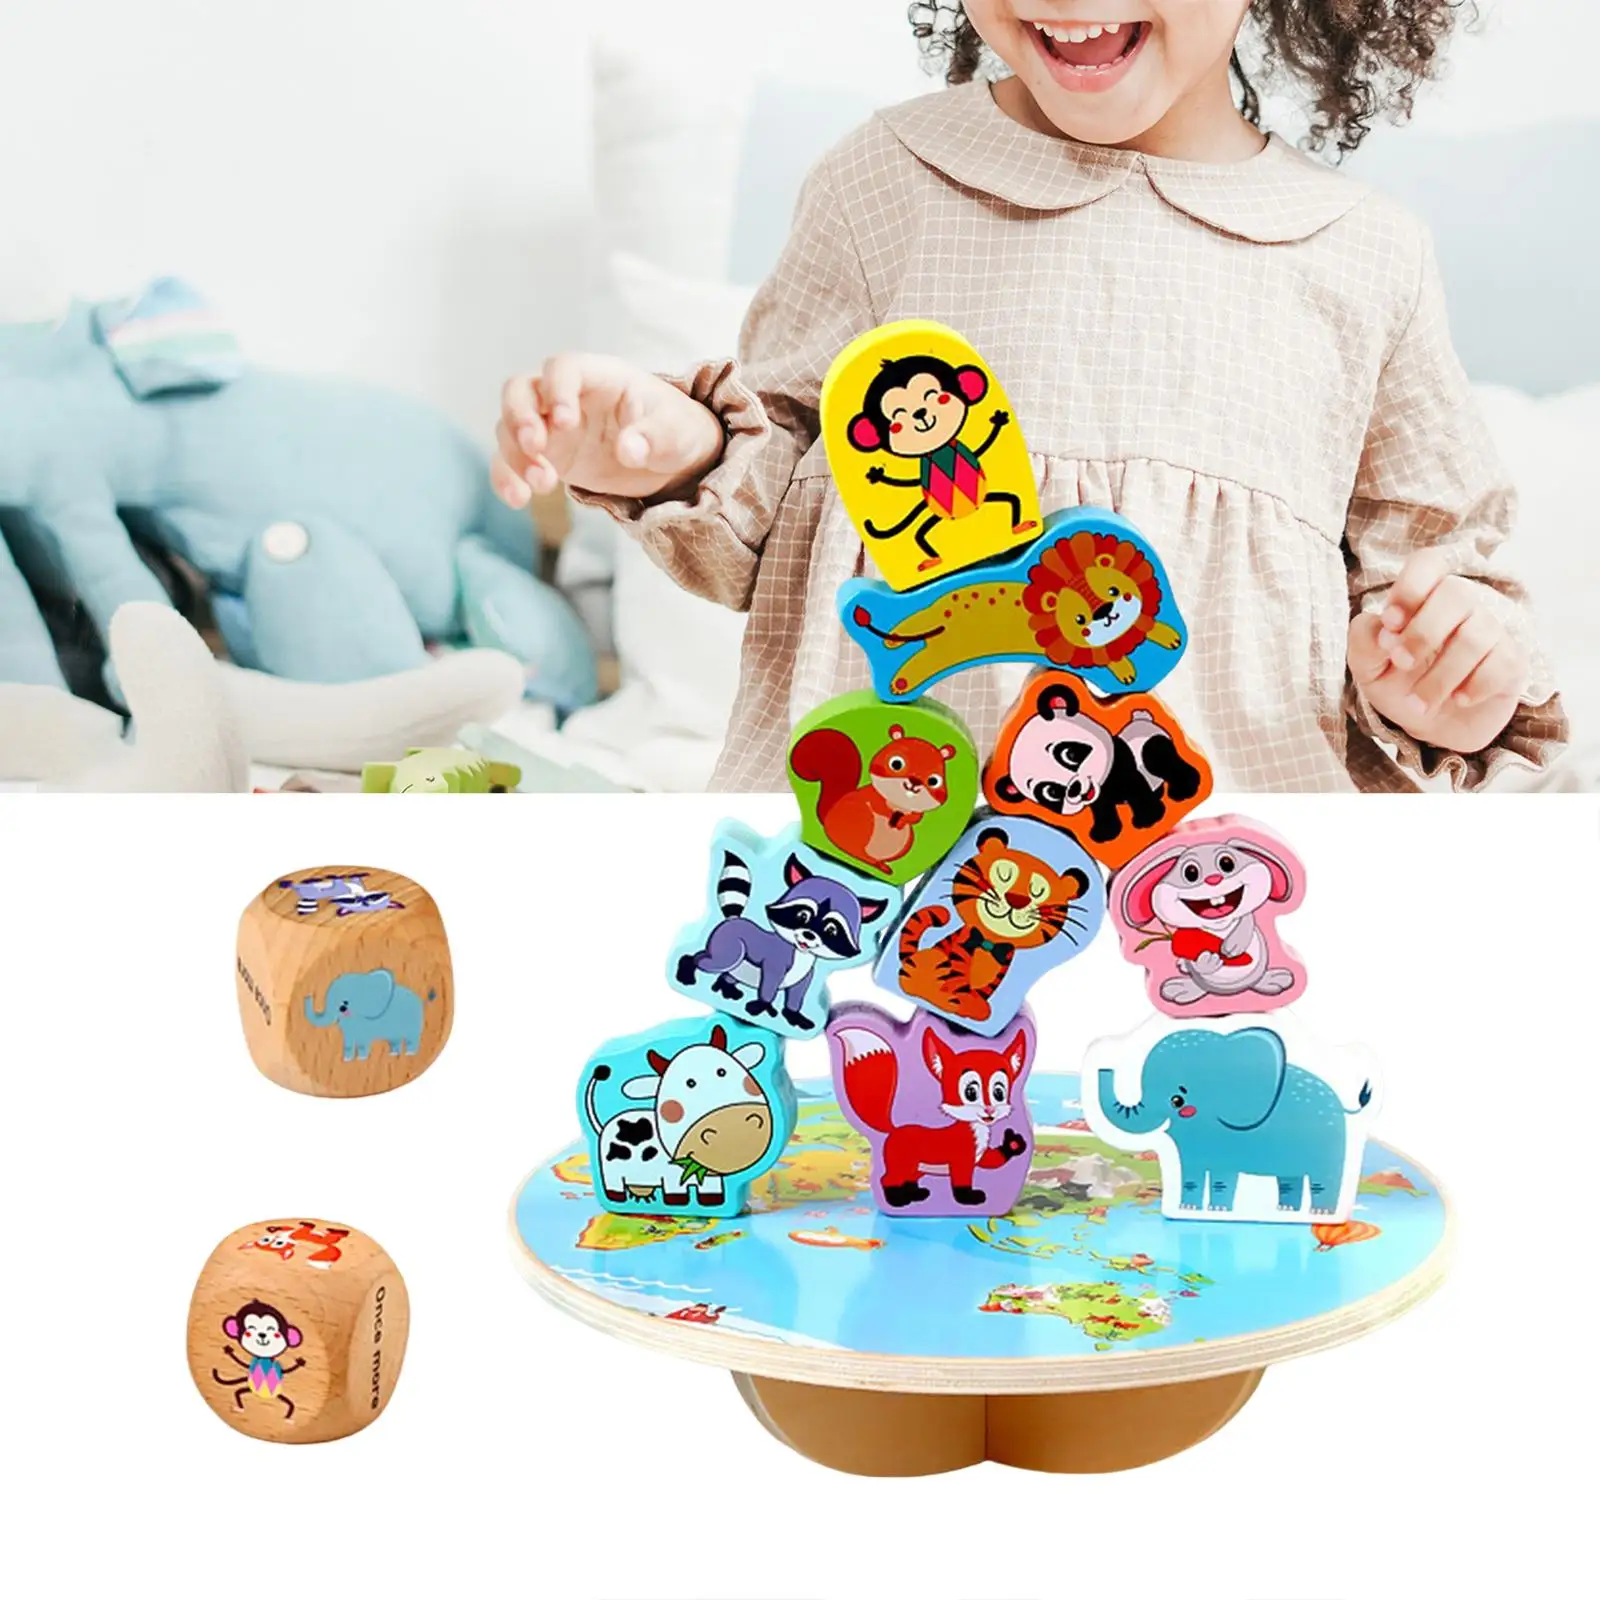 Wooden Balance Game Games Skill Motors Developing Intelligence Activity Puzzles for Age 4 5 6 Children Kids